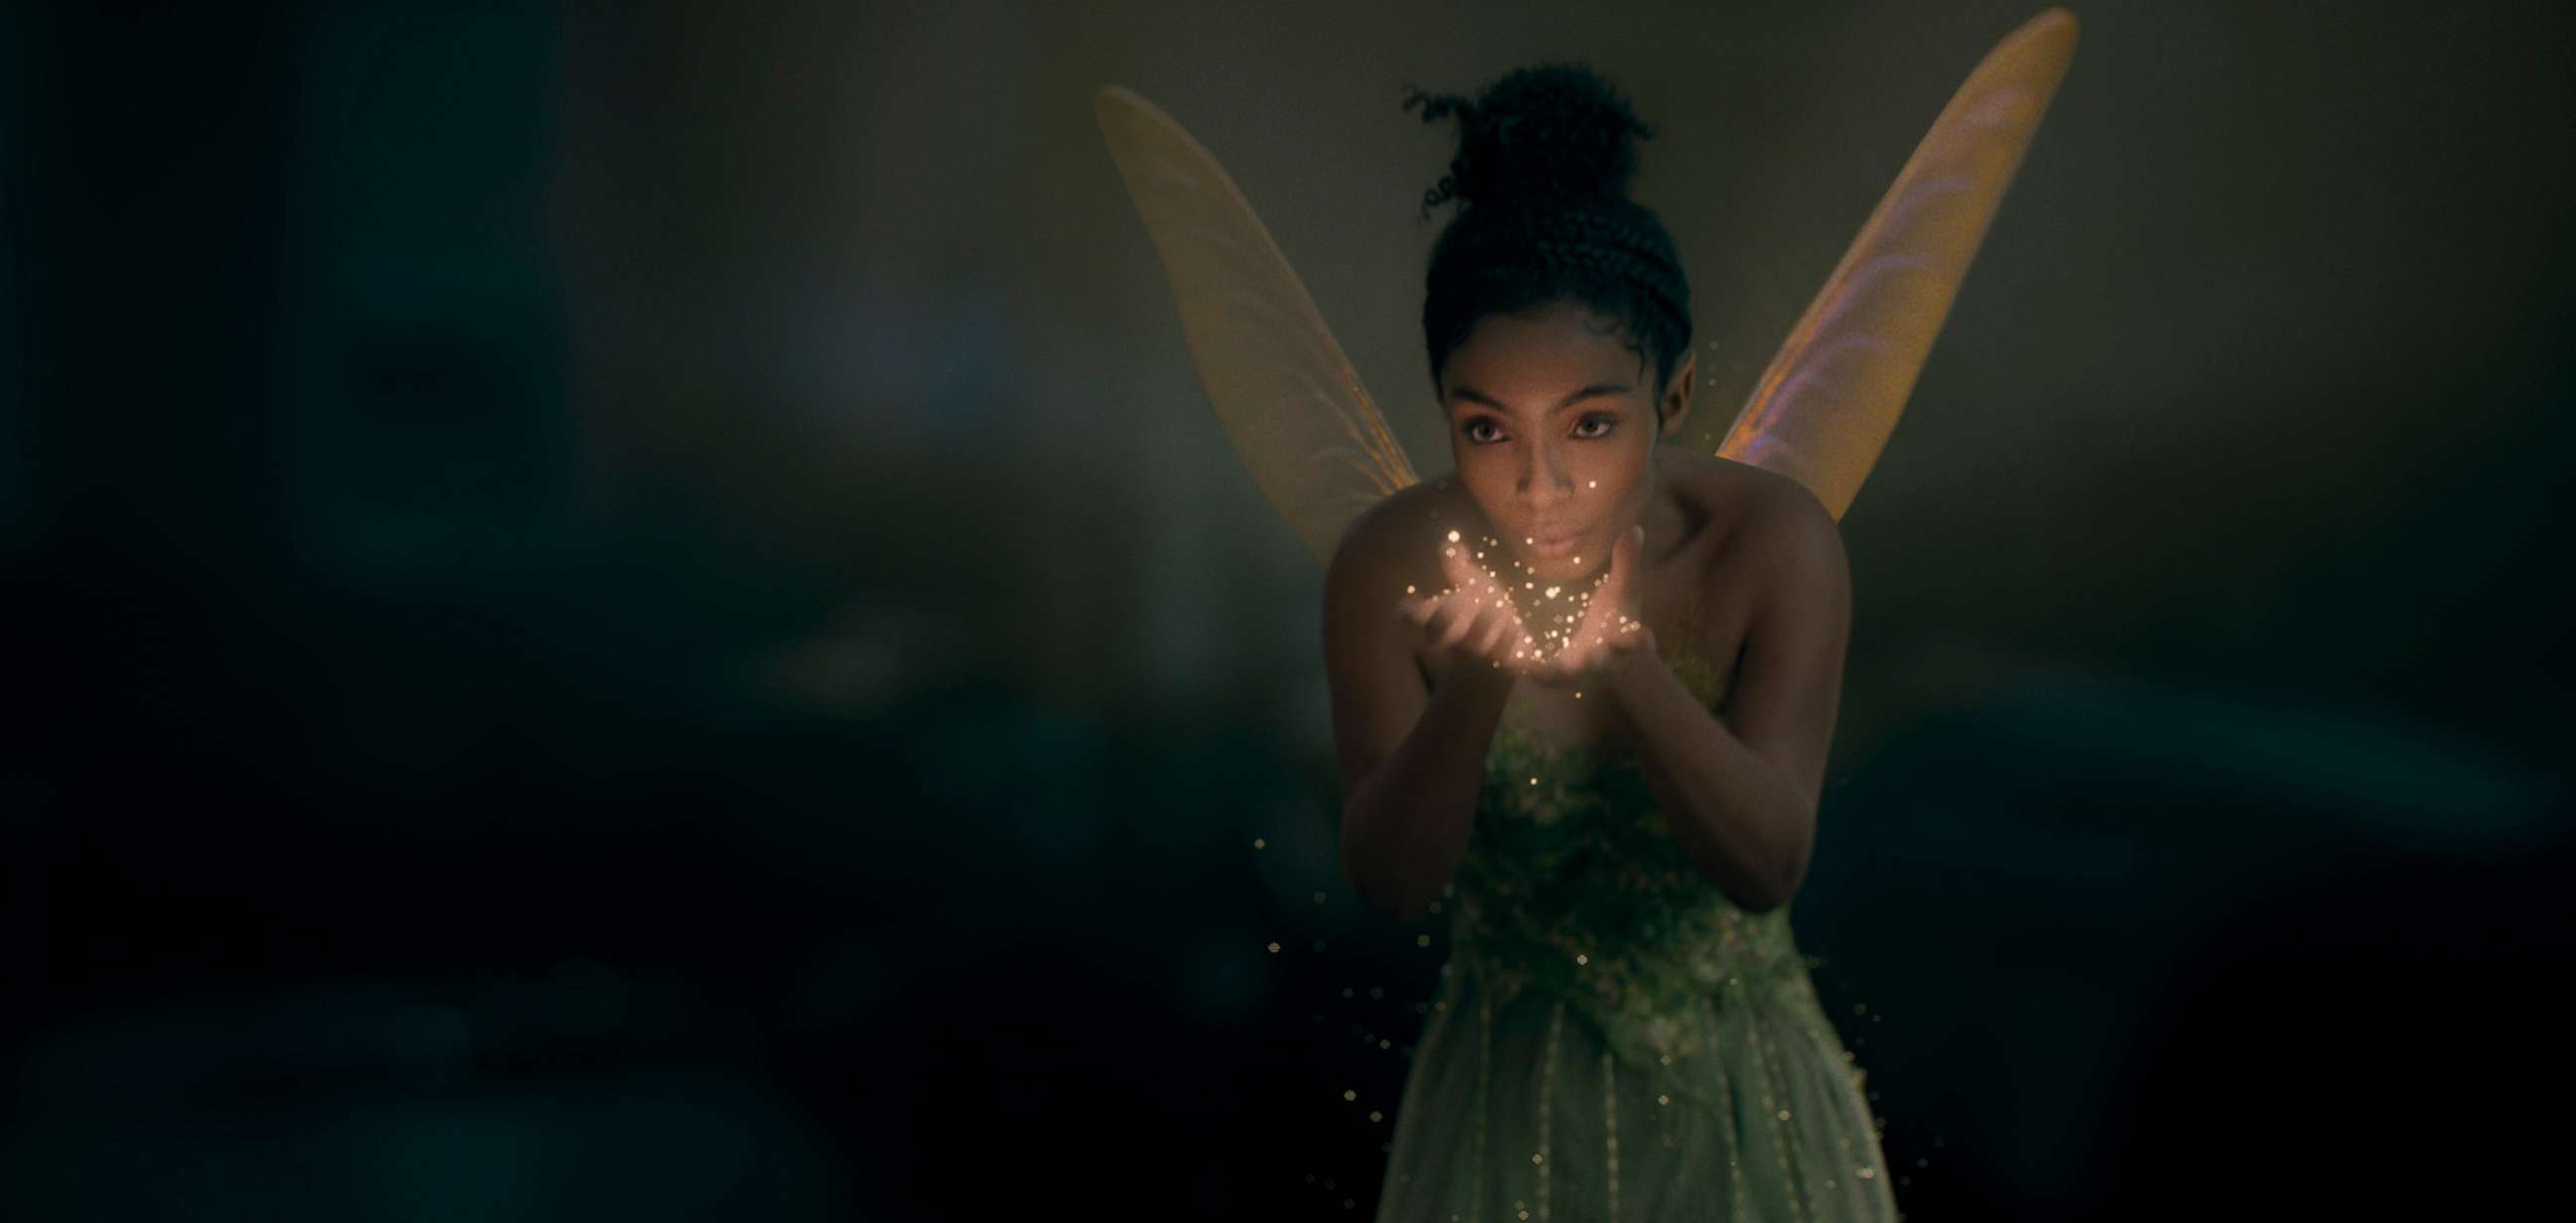 PHOTO: Yara Shahidi as Tinkerbell in Disney's live-action PETER PAN & WENDY, exclusively on Disney+. Photo courtesy of Disney. Â© 2023 Disney Enterprises, Inc. All Rights Reserved.